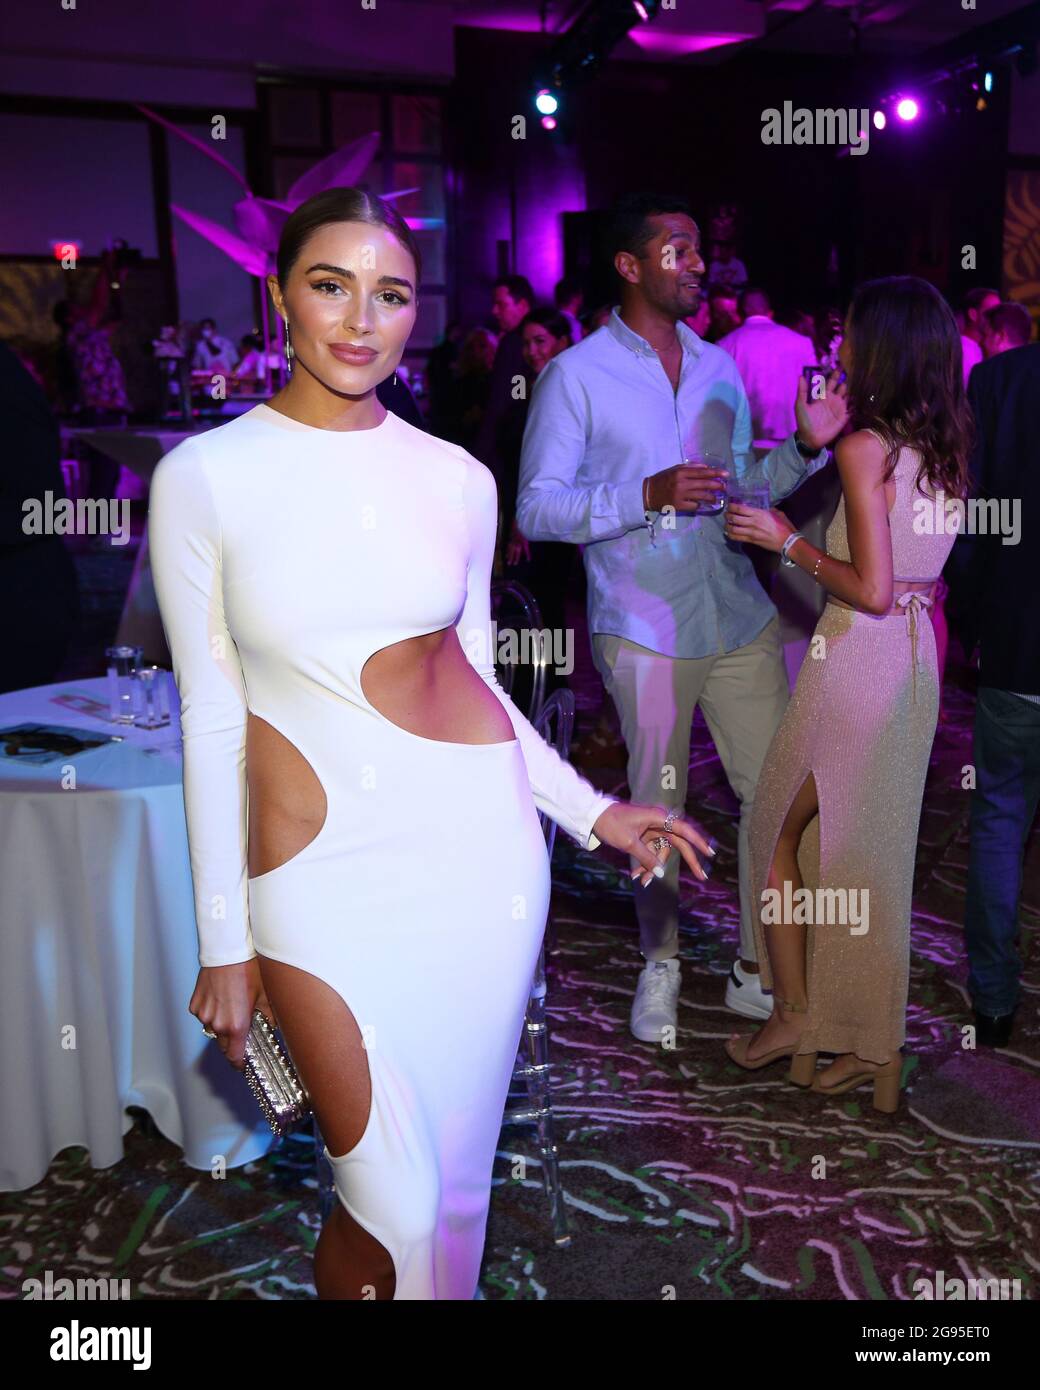 HOLLYWOOD, FLORIDA - JULY 23: Olivia Culpo attends Sports Illustrated Swimsuit 2021 Issue Cover Reveal Party - Arrivals at Seminole Hard Rock Hotel & Casino on July 23, 2021 in Hollywood, Florida.  People:  Olivia Culpo Credit: hoo-me / MediaPunch Stock Photo